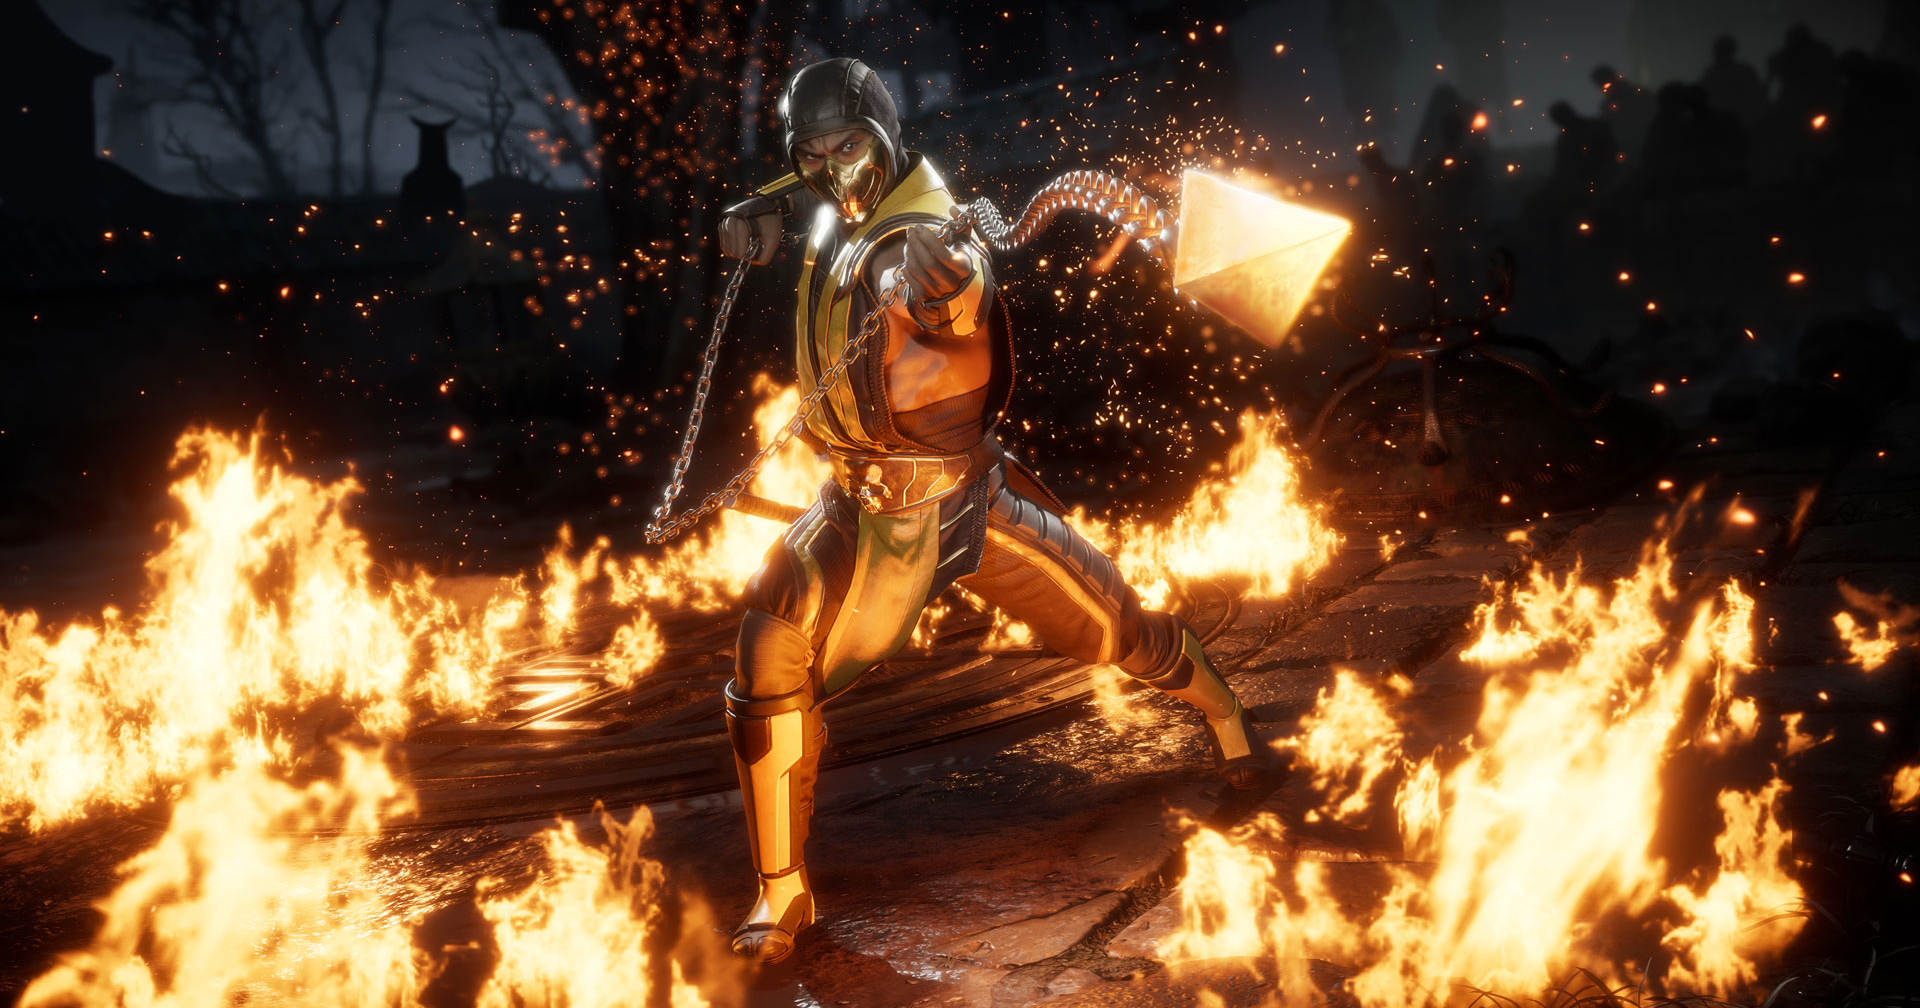 We will see if characters like Scorpion make it into the Mortal Combat 12 roster. Here we see him with his chain in the fire.